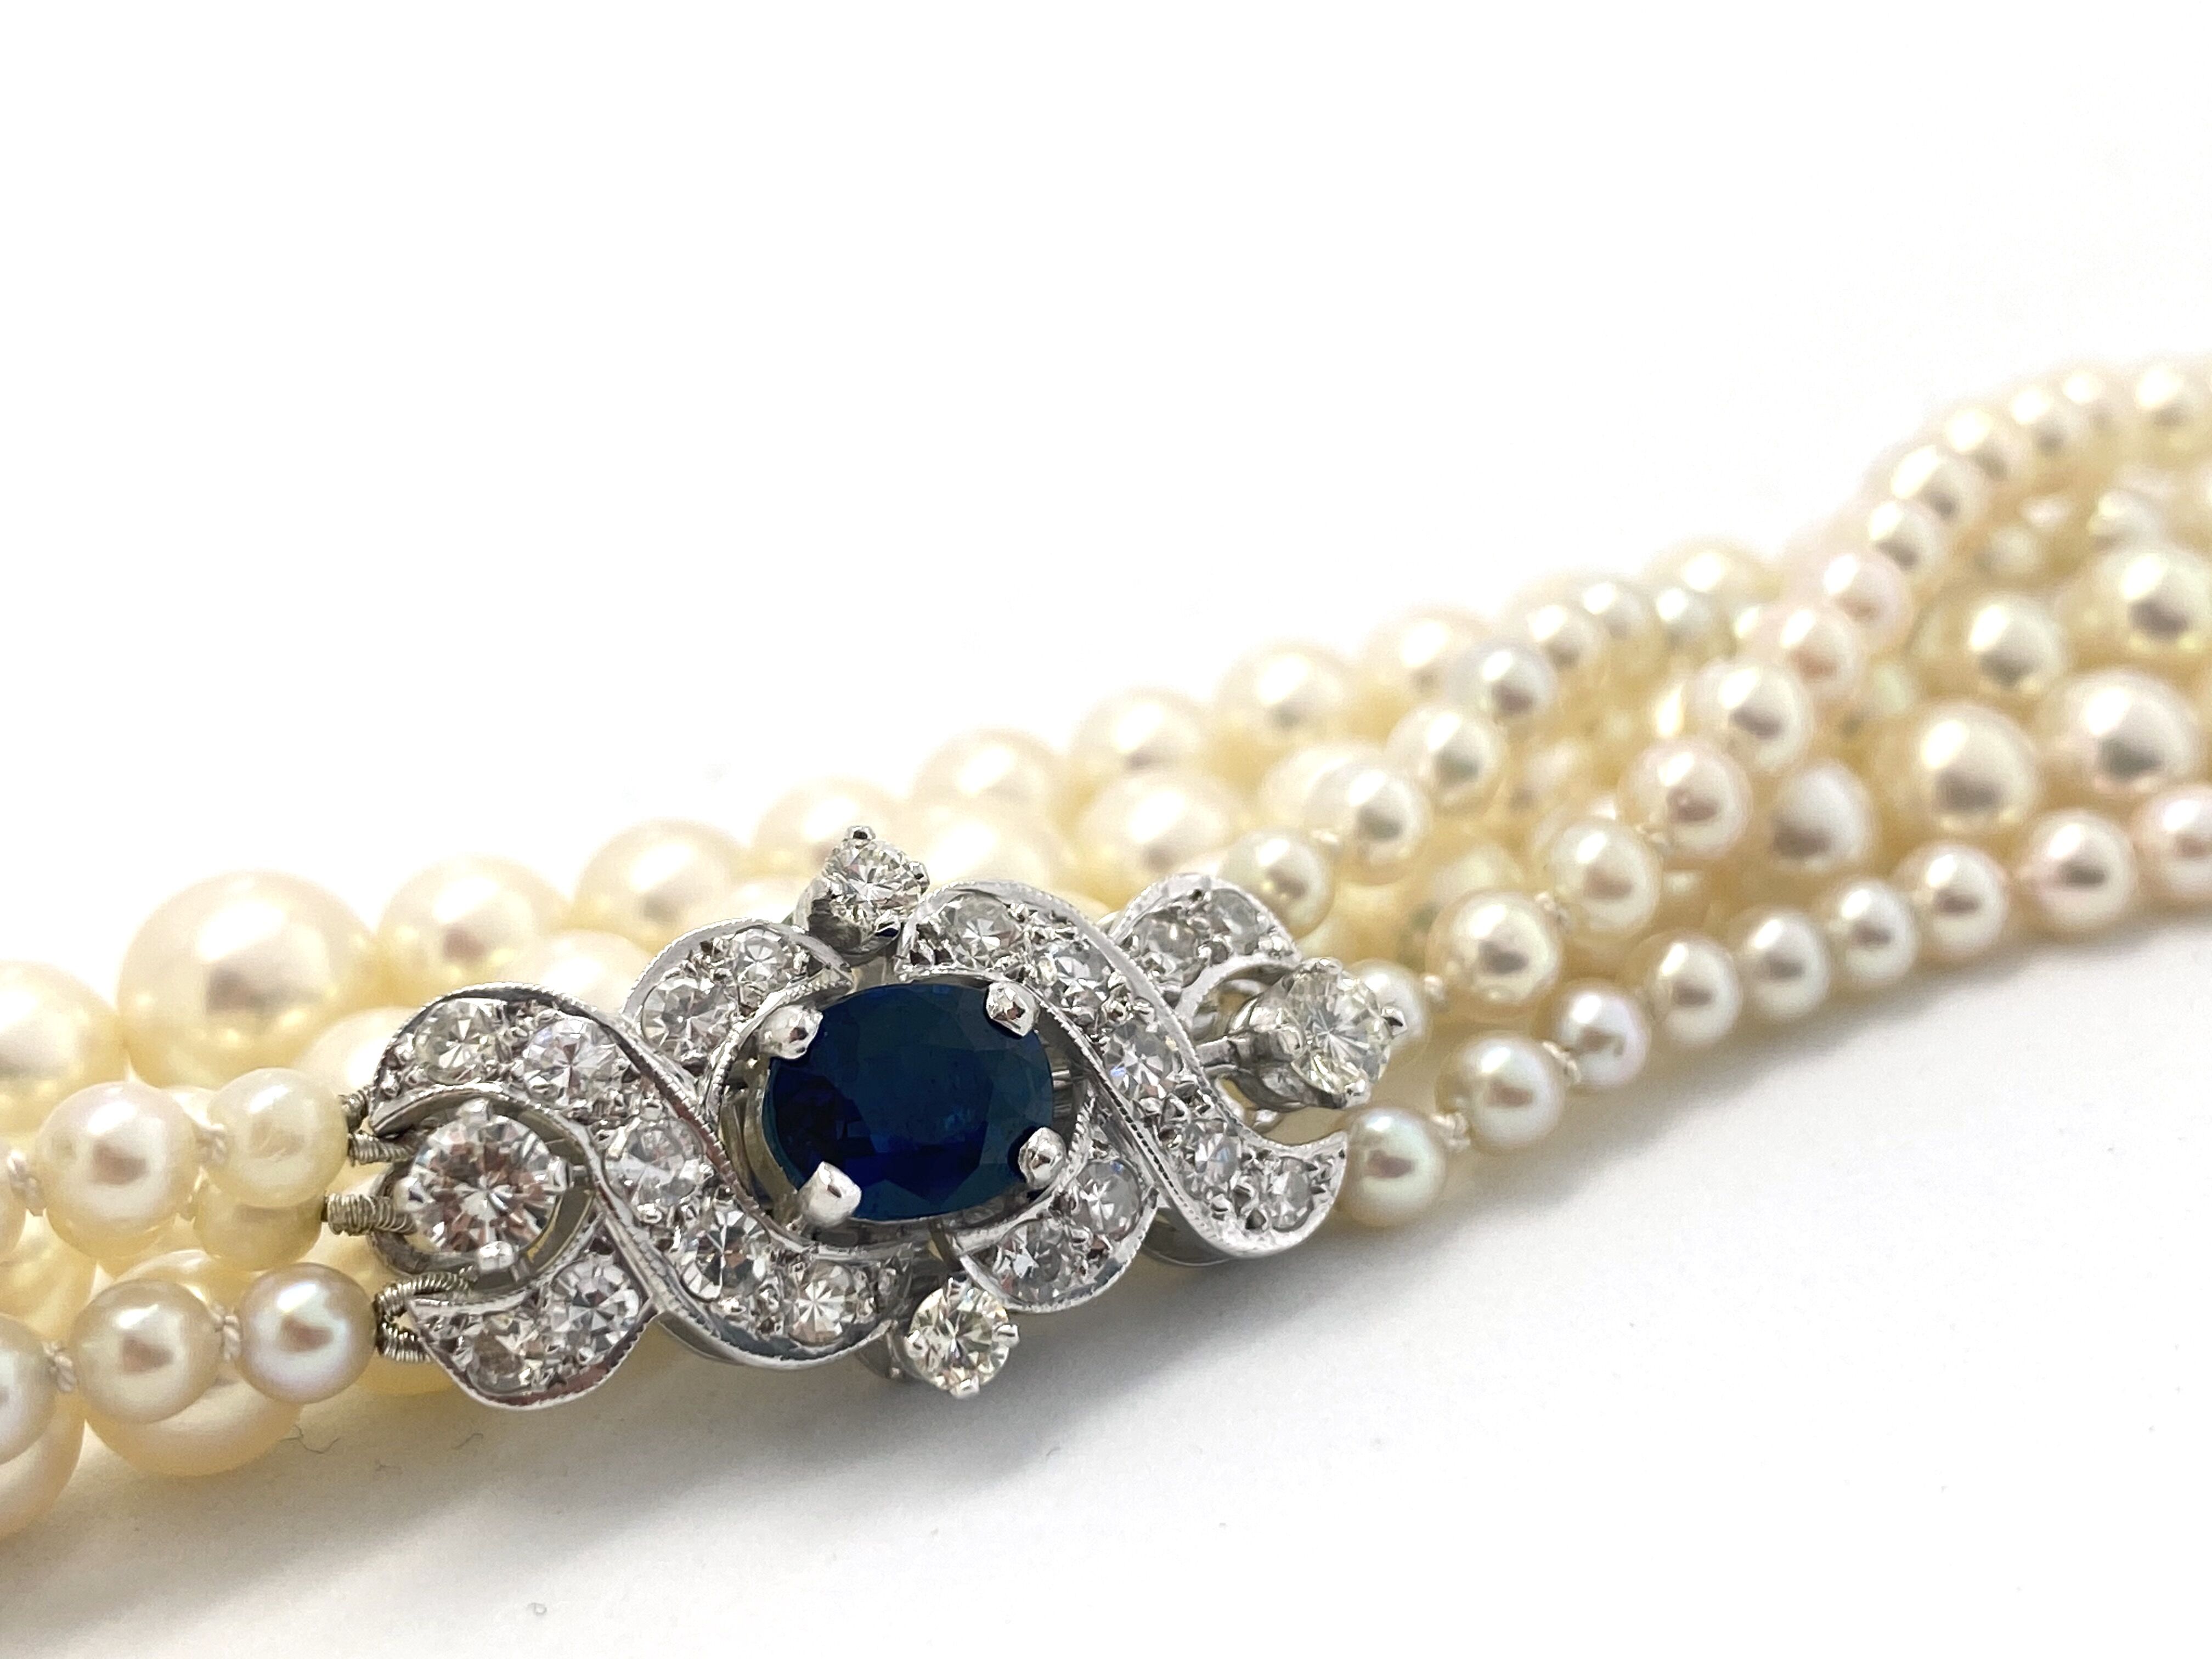 Triple Row Pearl Necklace with Sapphire and Diamond Clasp, three graduating rows of high quality